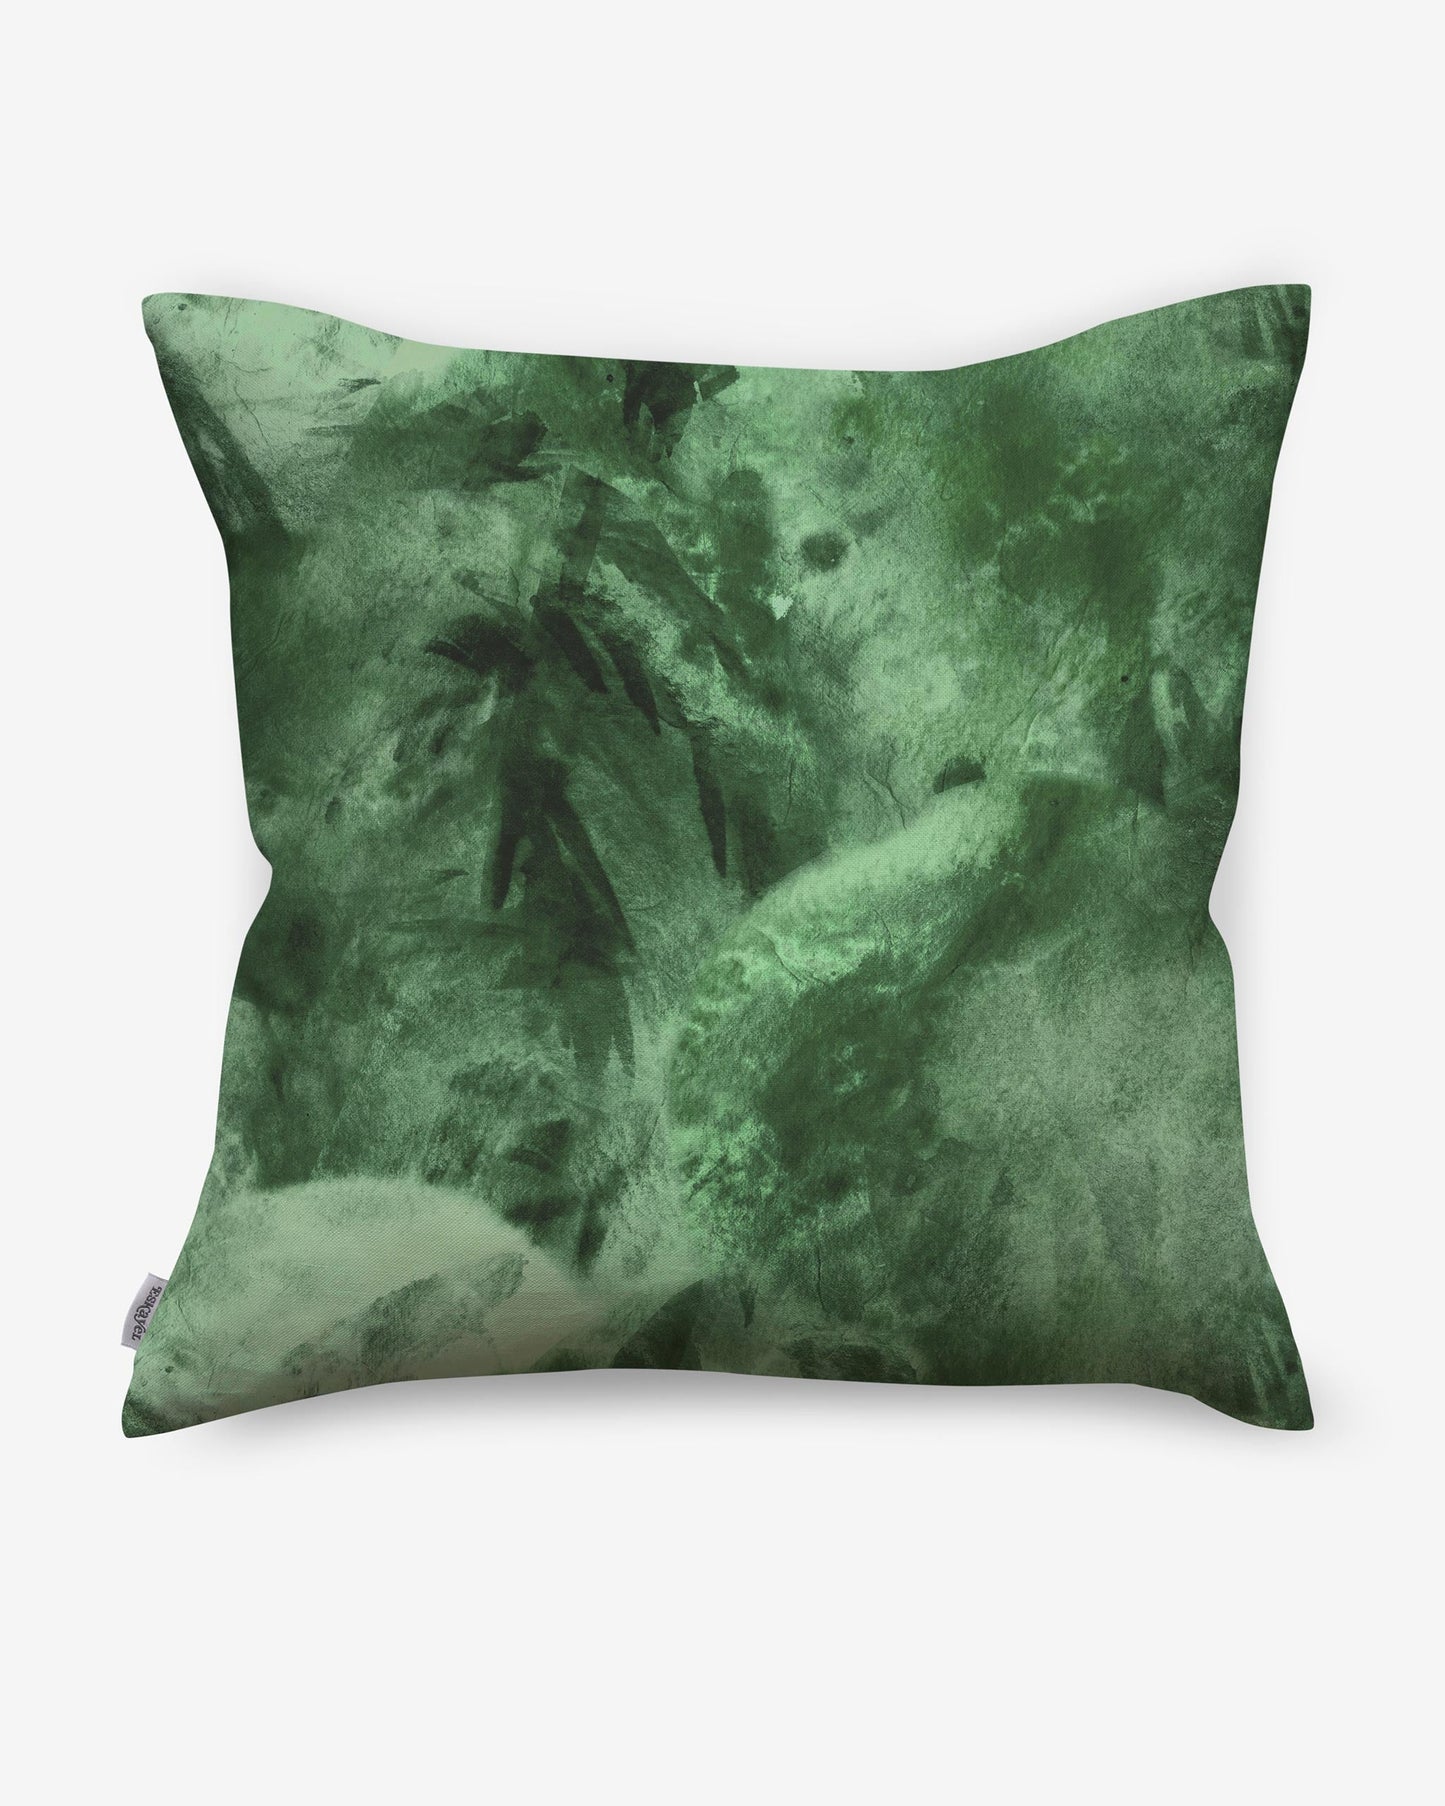 Description: A Palmeti Pillow Verde with a black background and fabric pattern